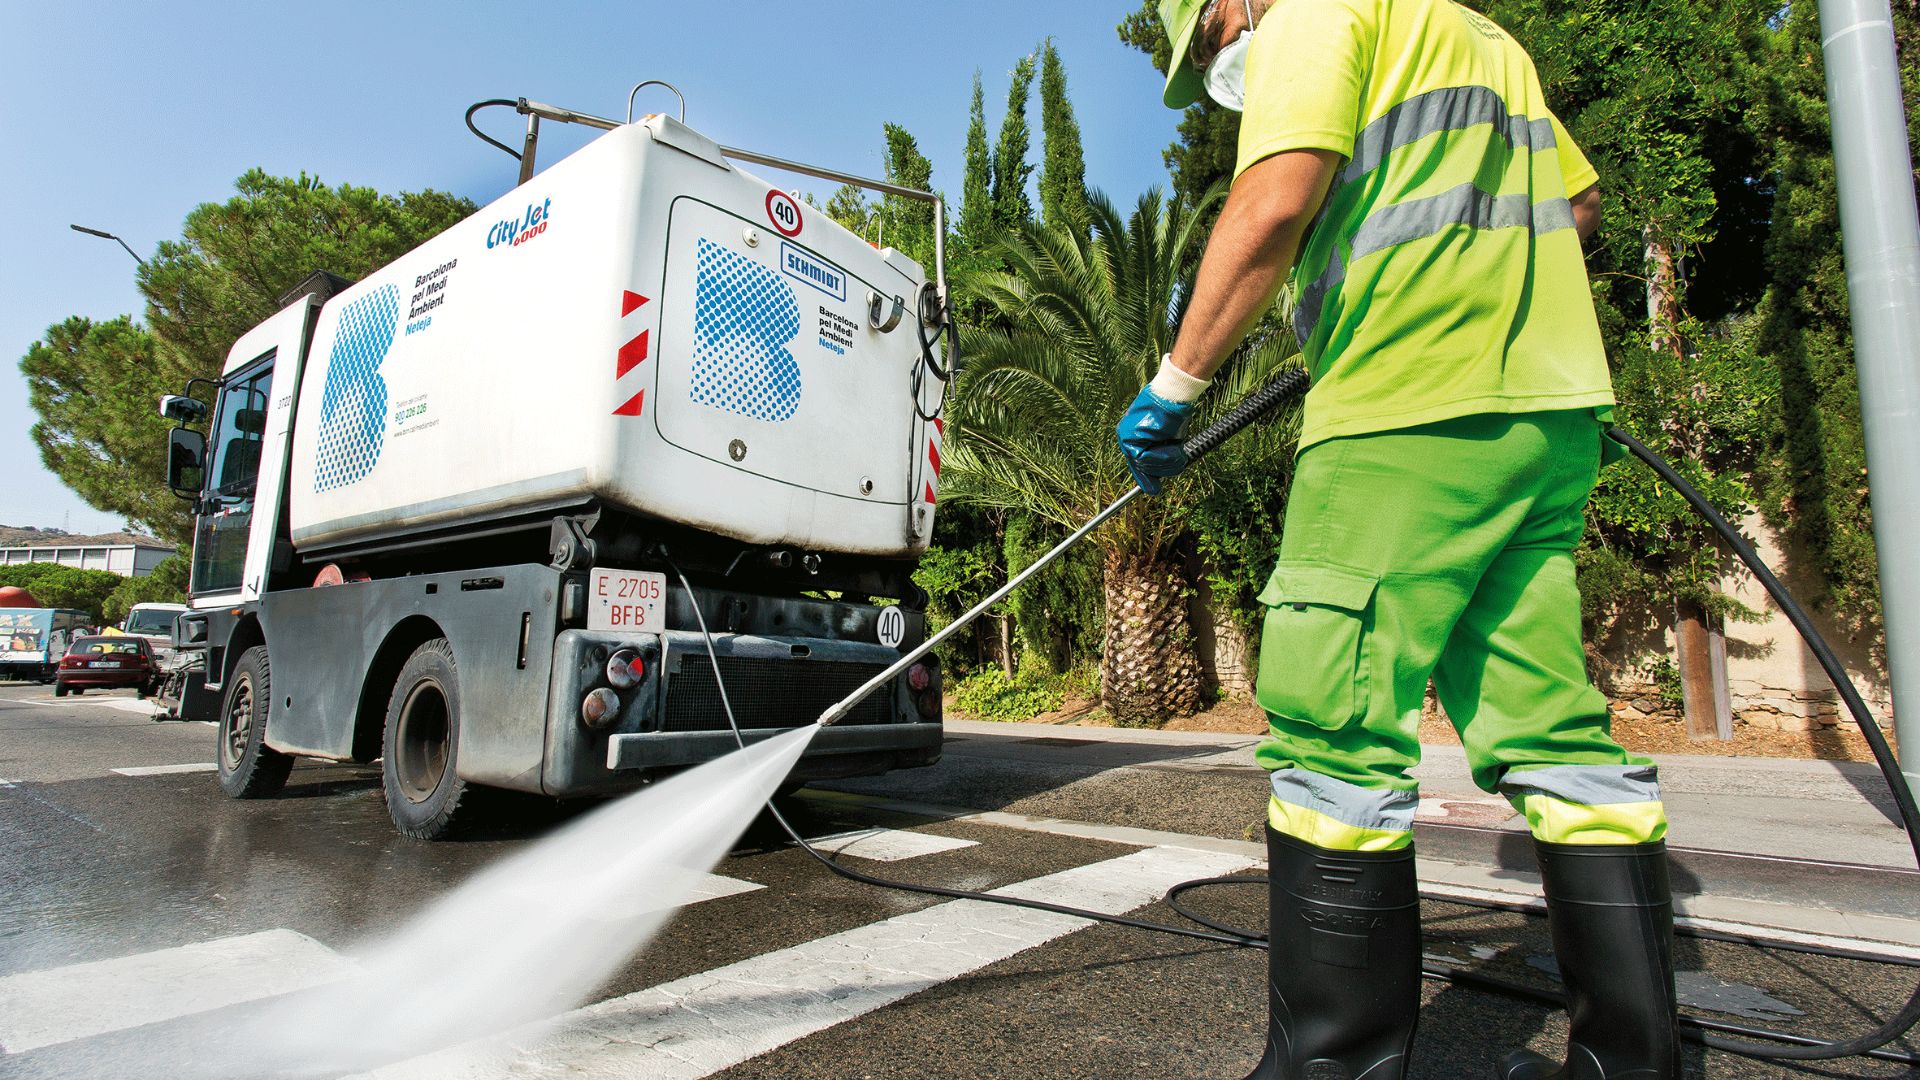 Importance of street cleaning